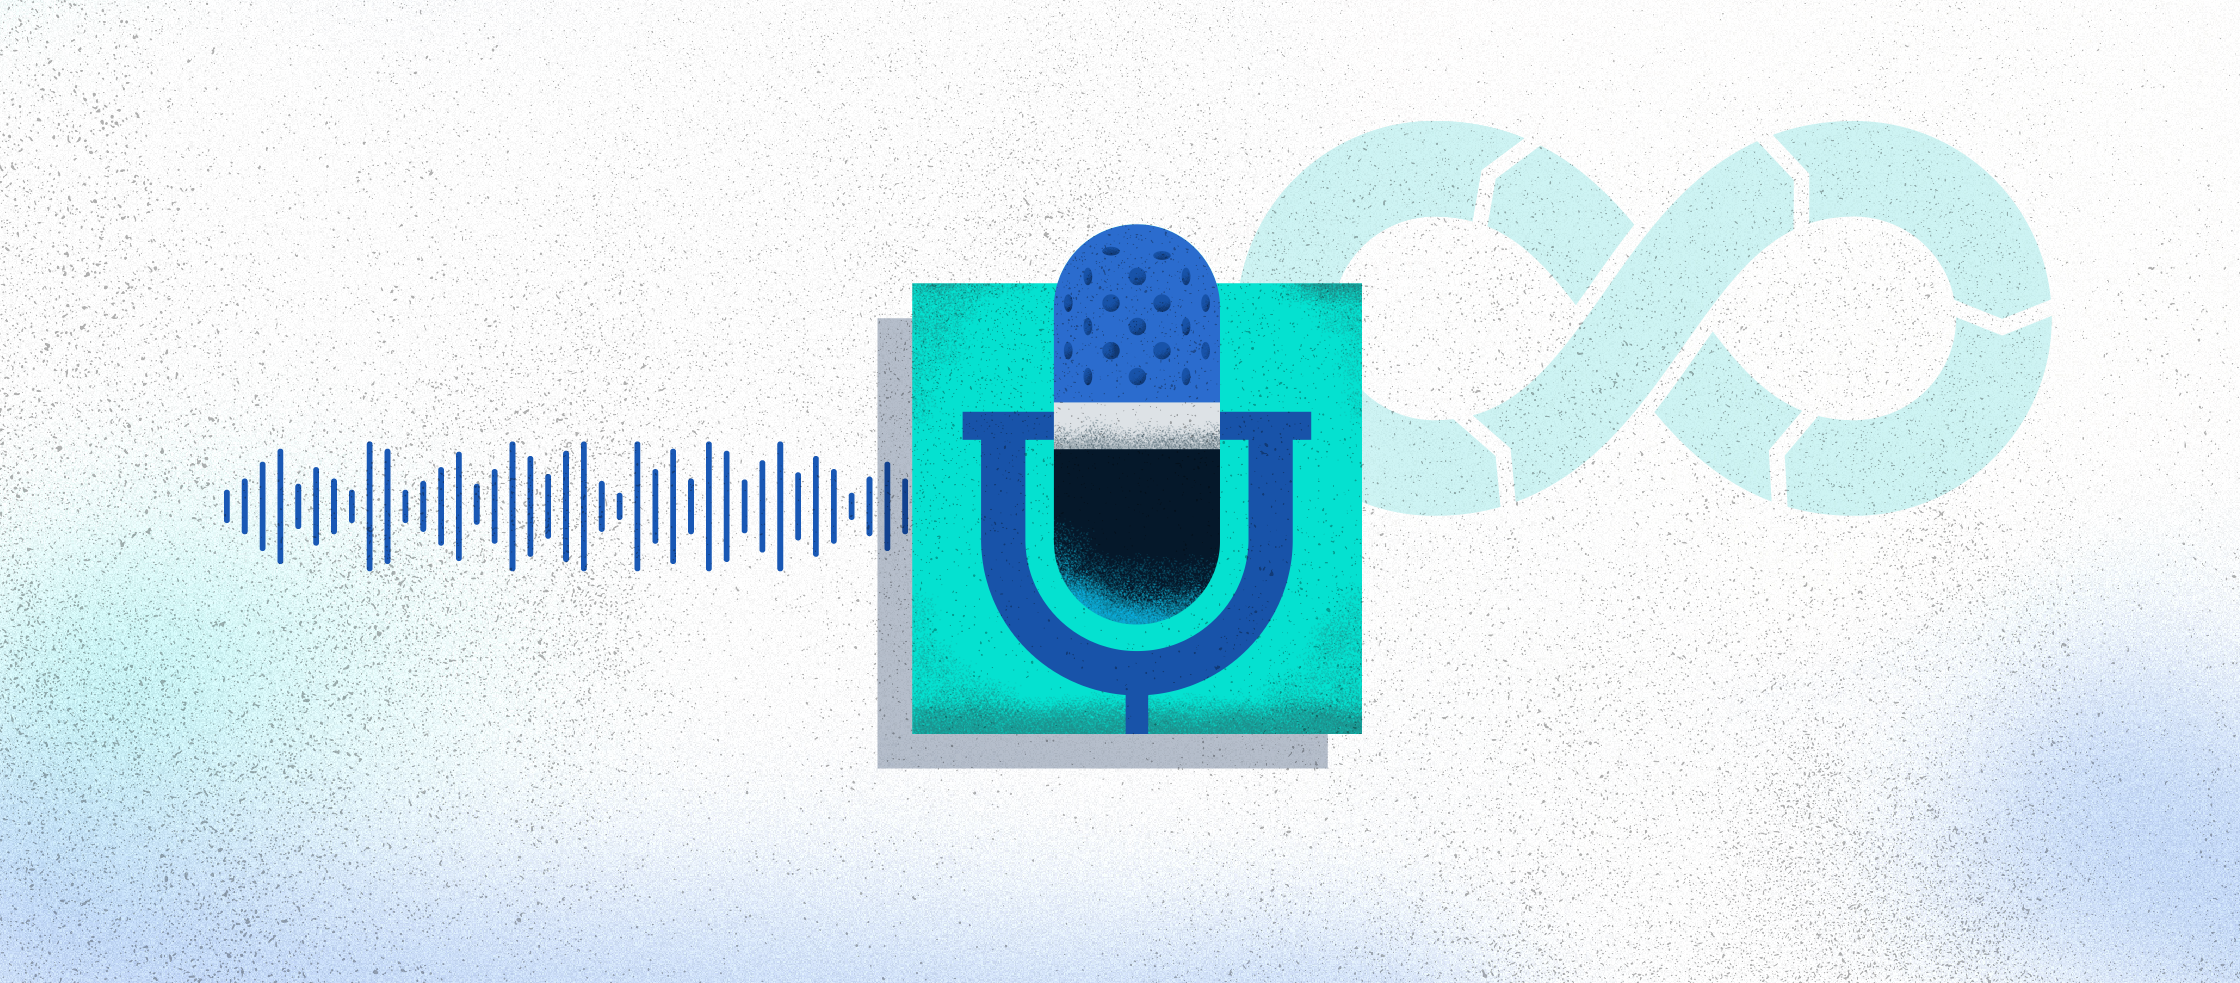 Top 10 Data Podcasts for DataOps Featured Image